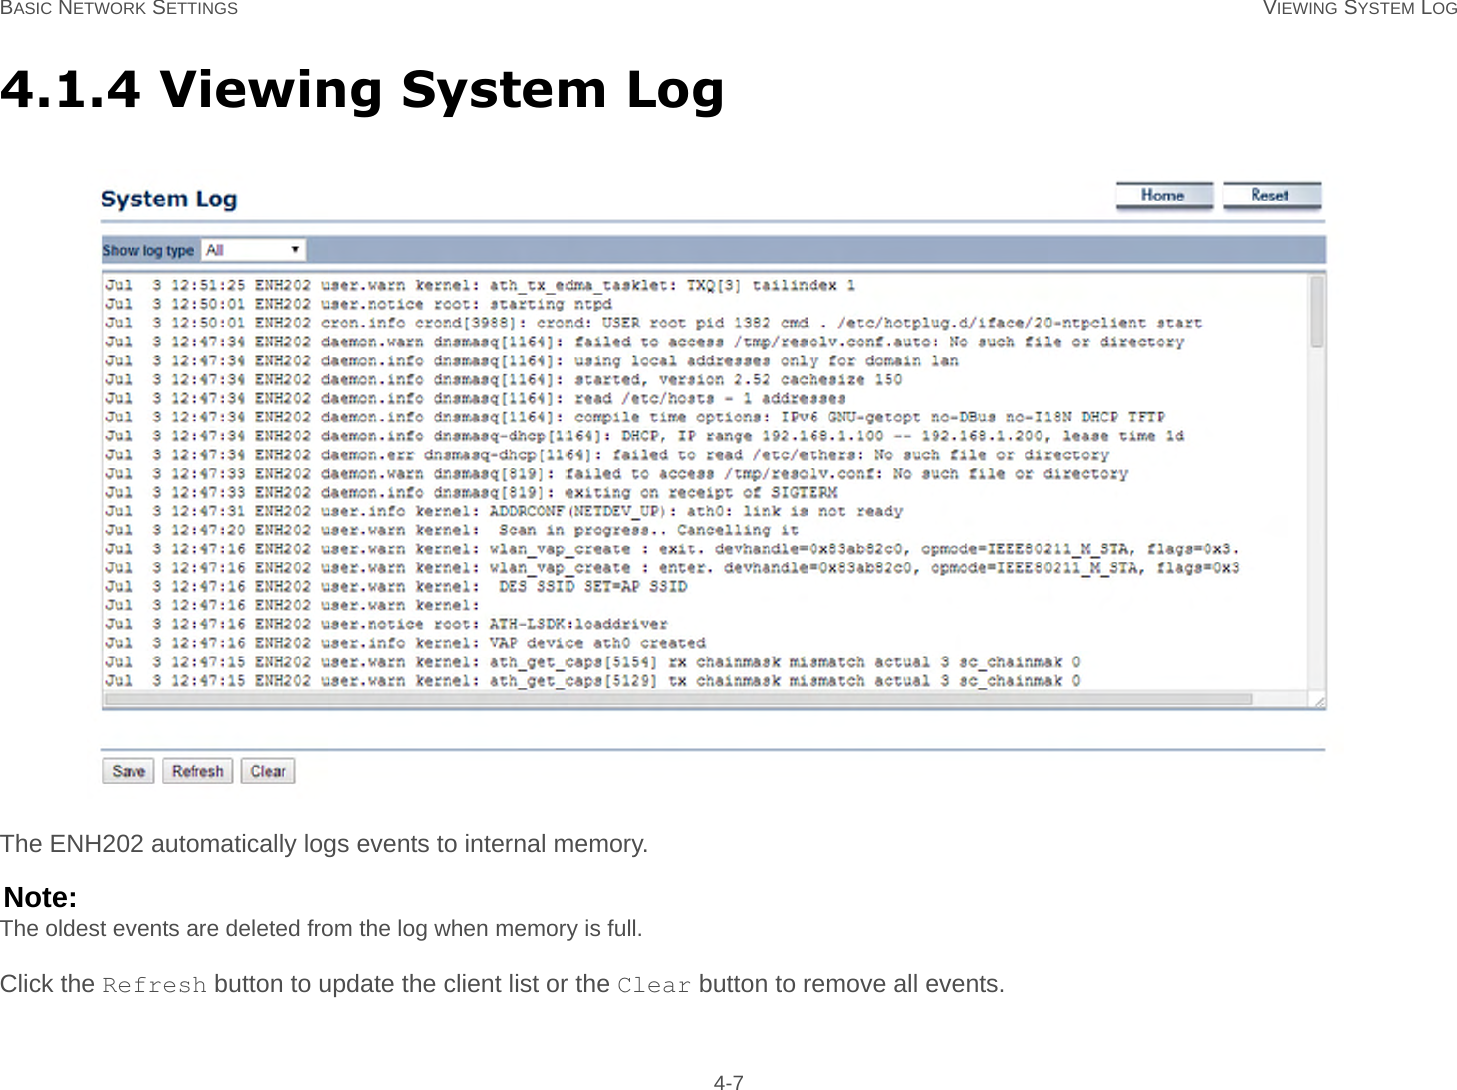 BASIC NETWORK SETTINGS VIEWING SYSTEM LOG 4-74.1.4 Viewing System LogThe ENH202 automatically logs events to internal memory.Note:The oldest events are deleted from the log when memory is full.Click the Refresh button to update the client list or the Clear button to remove all events.